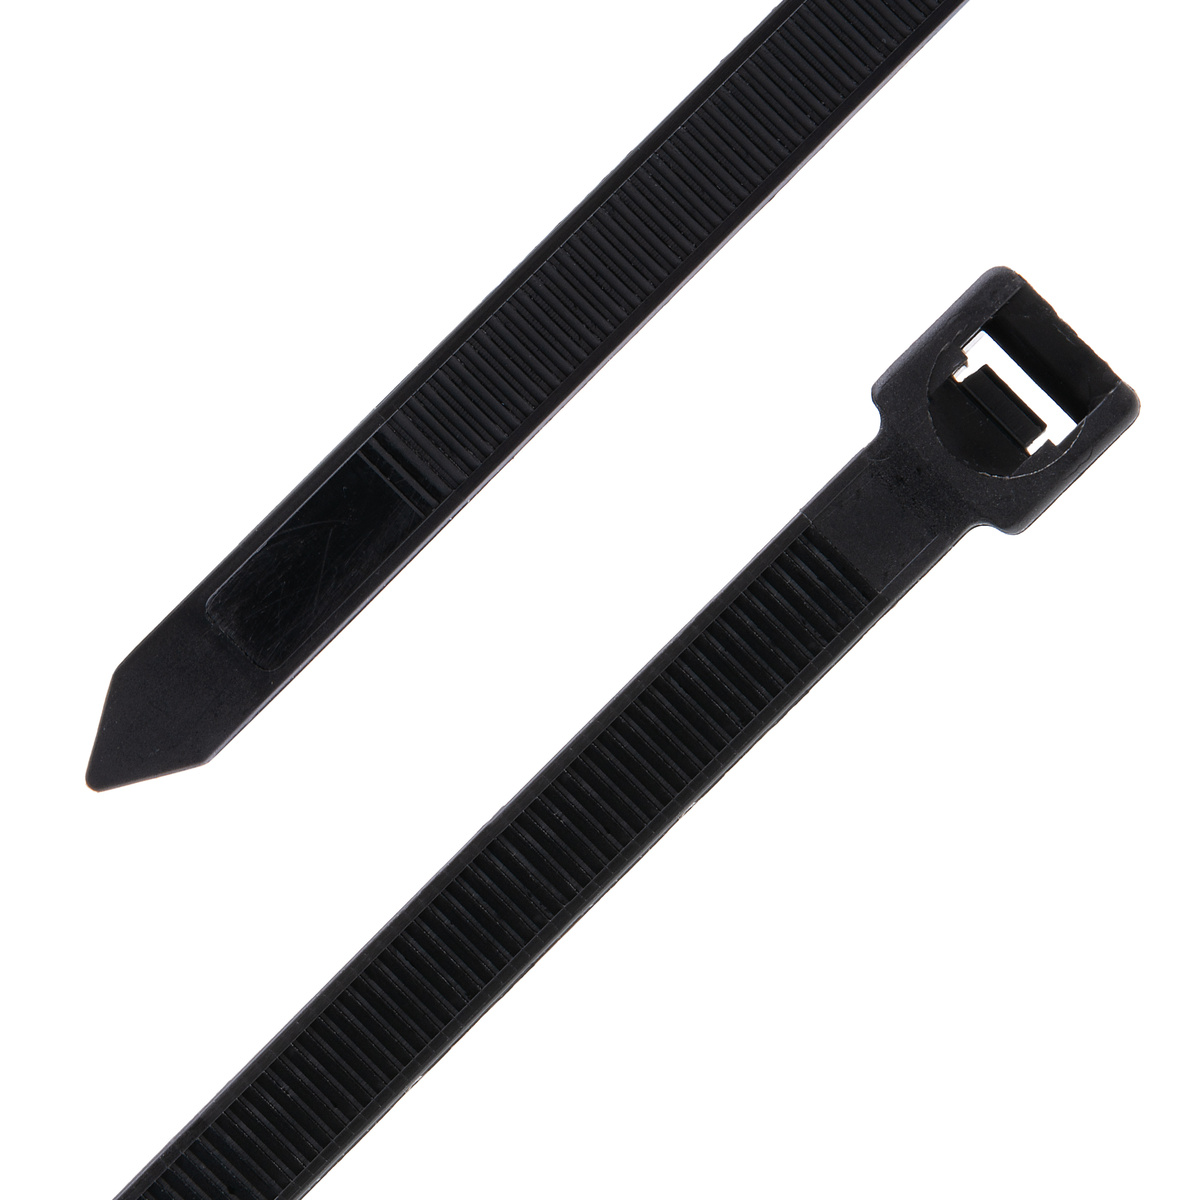 Secure Cable Ties 8 inch Black Heavy Duty Cable Tie - 1000 Pack